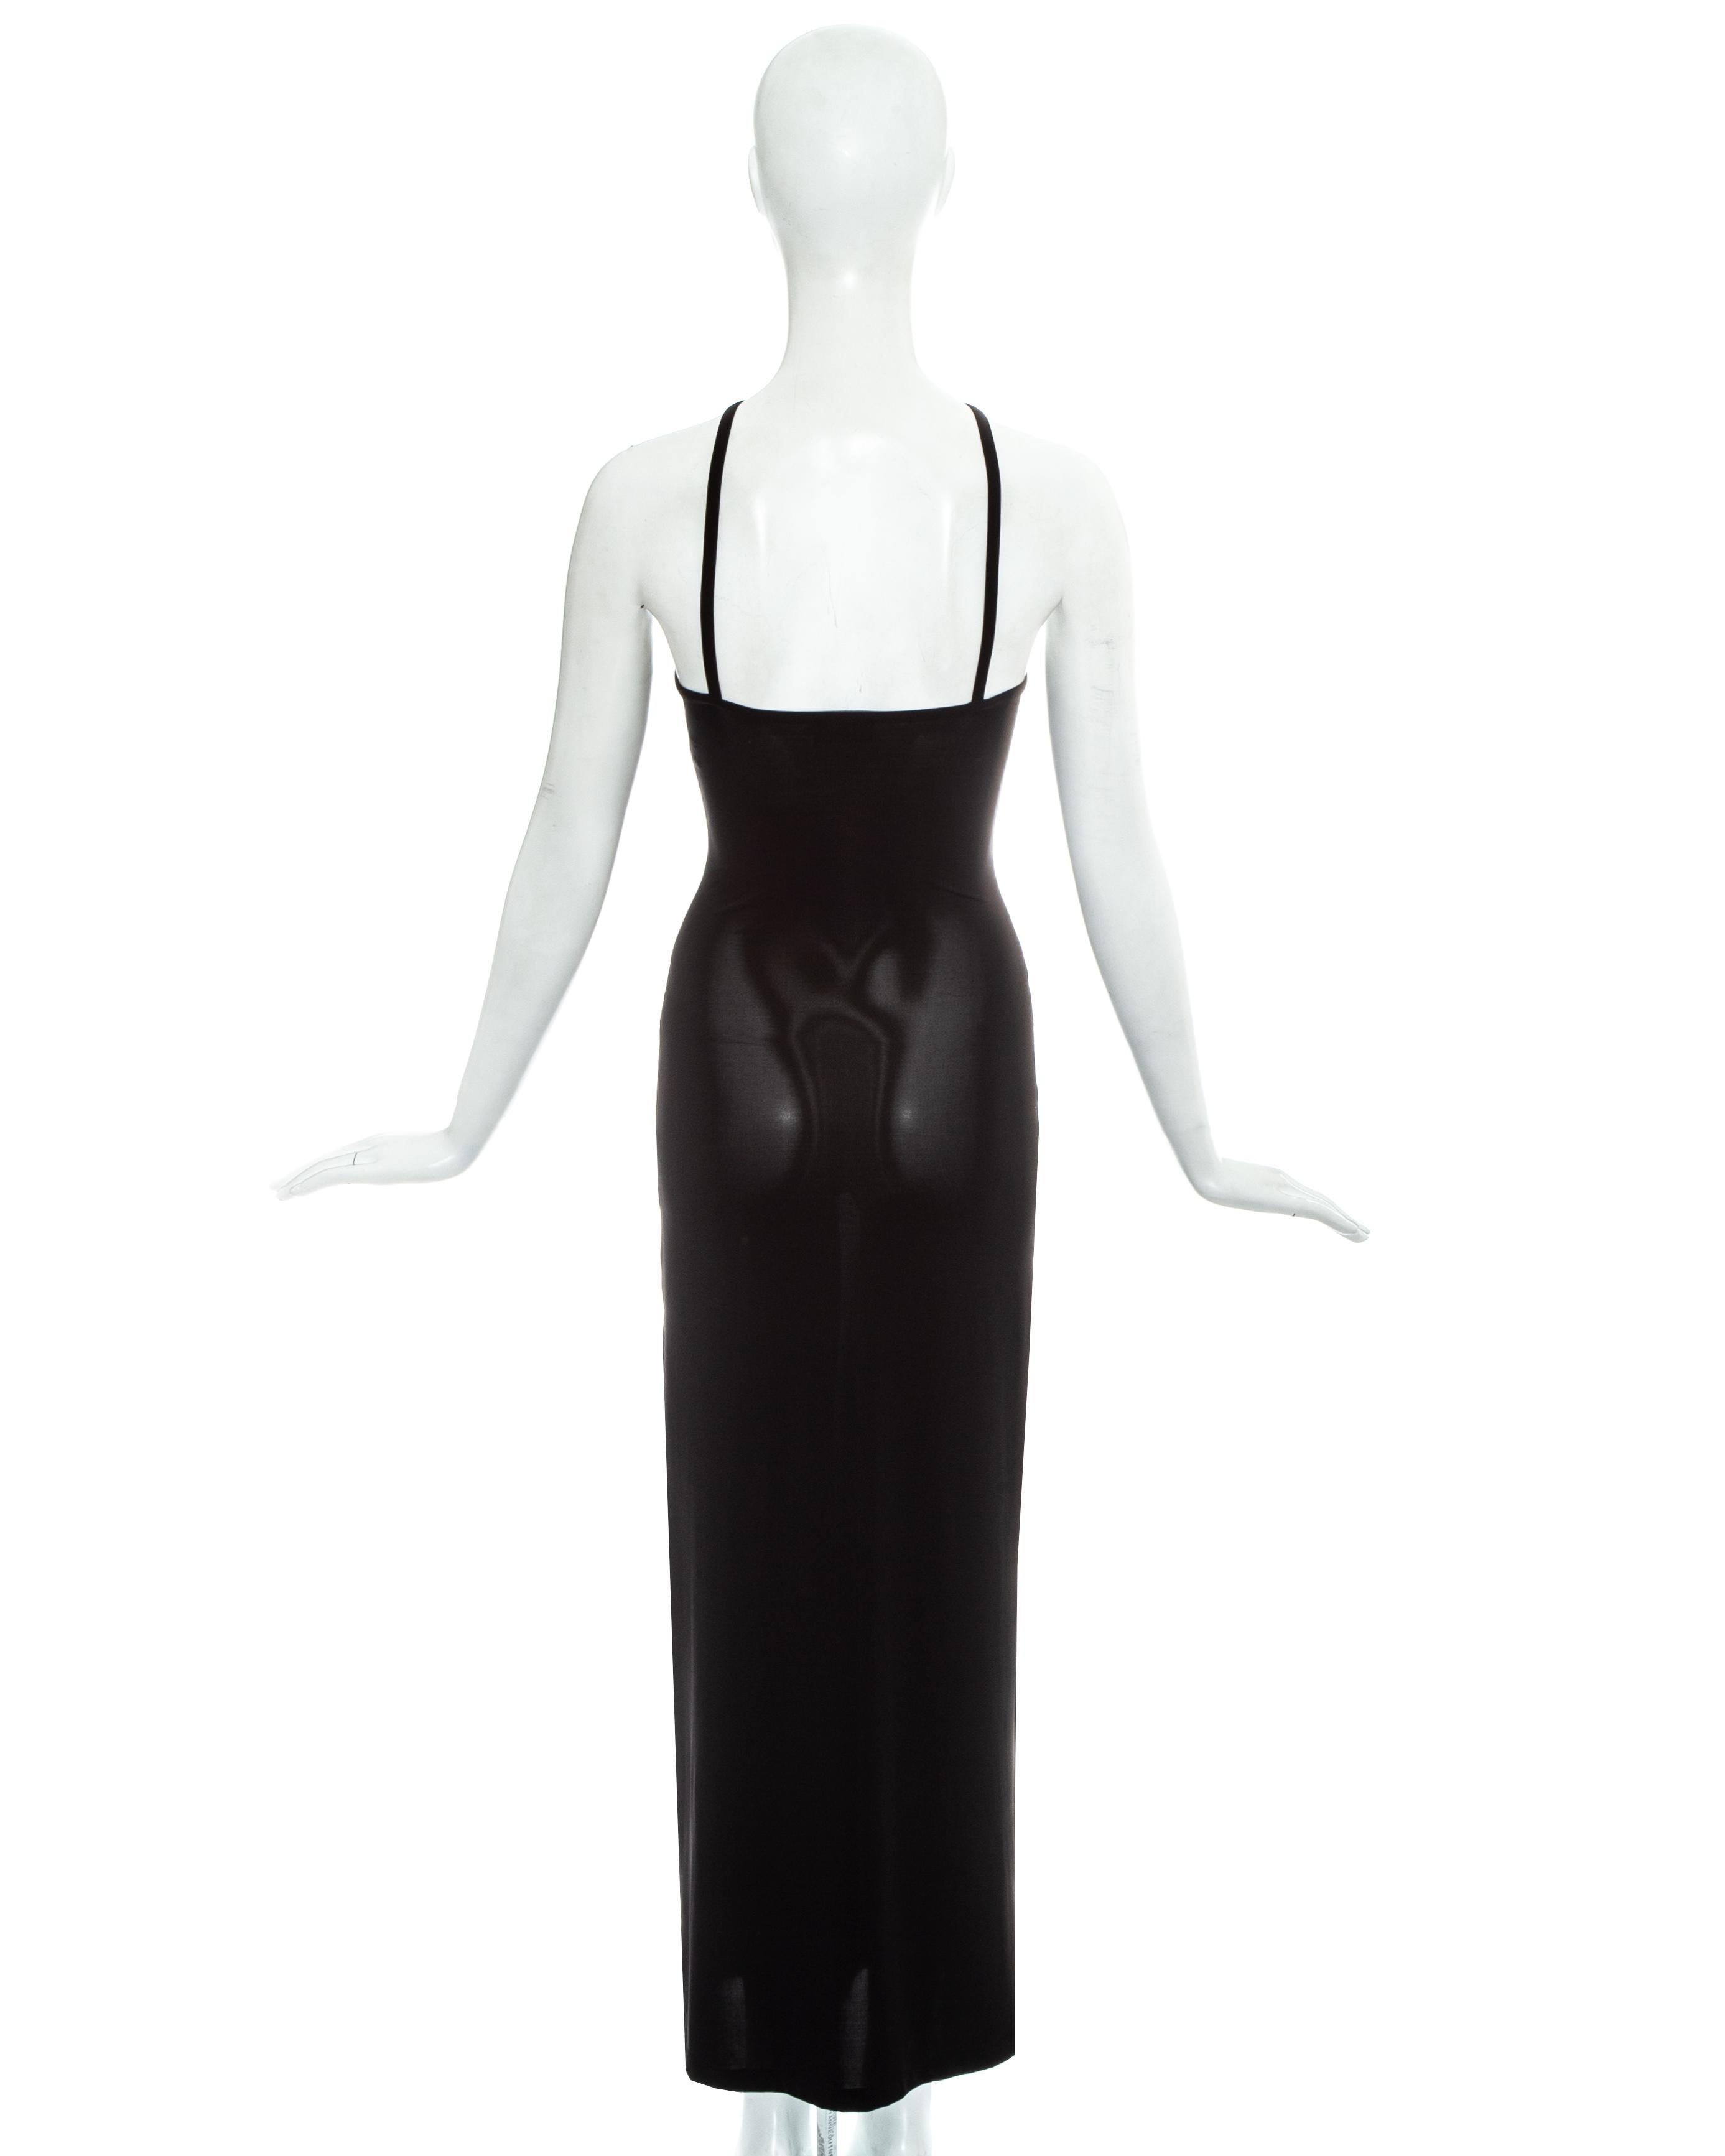 Fendi by Karl Lagerfeld black lycra maxi dress, ss 1997 In Excellent Condition For Sale In London, London